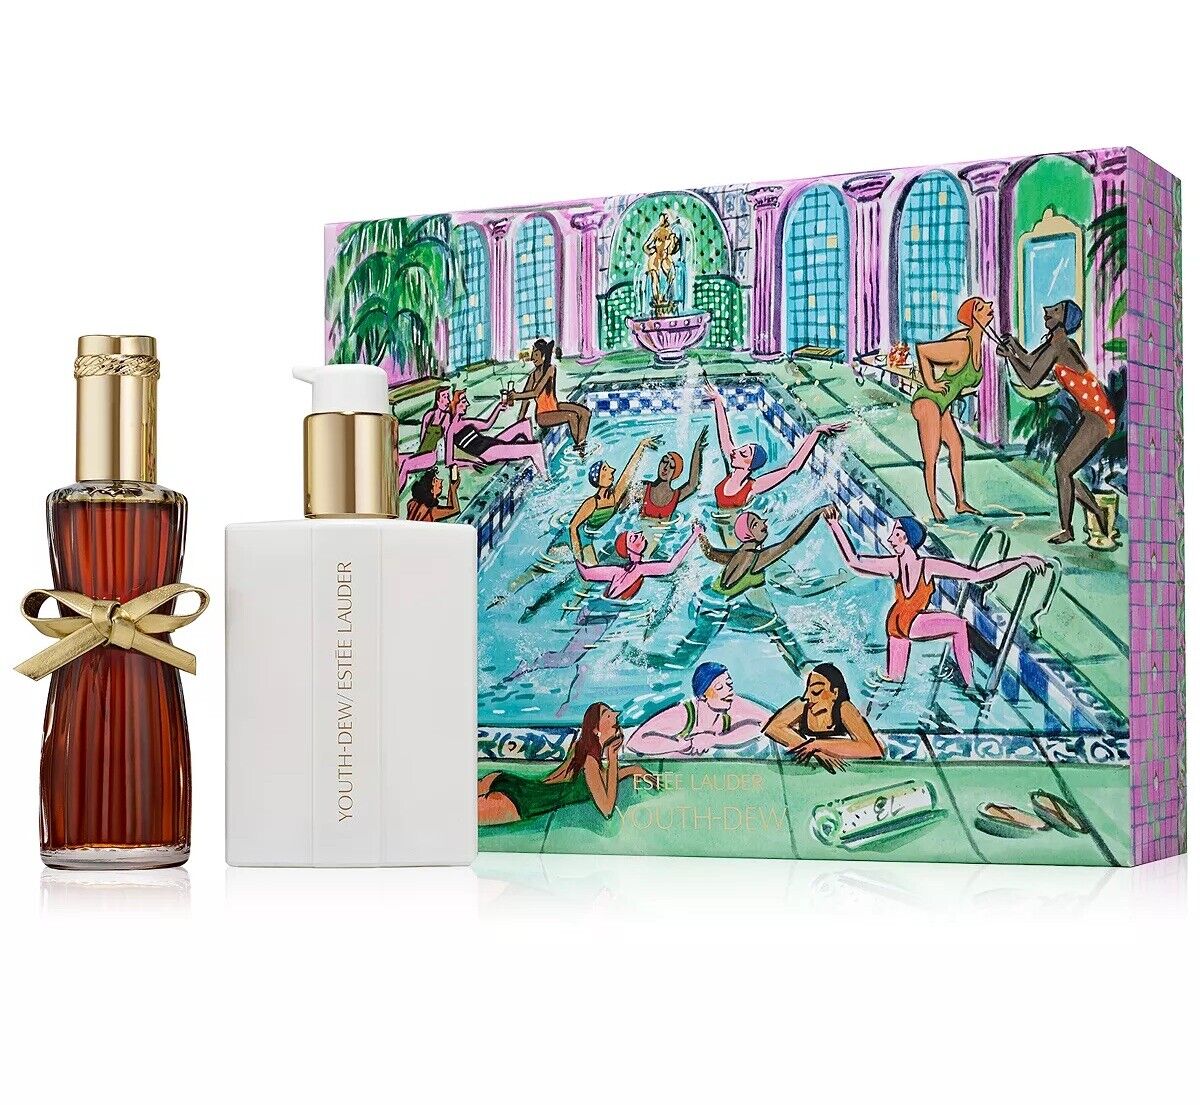 Estee Lauder Youth Dew Gift Set 2 Piece As Pictured New